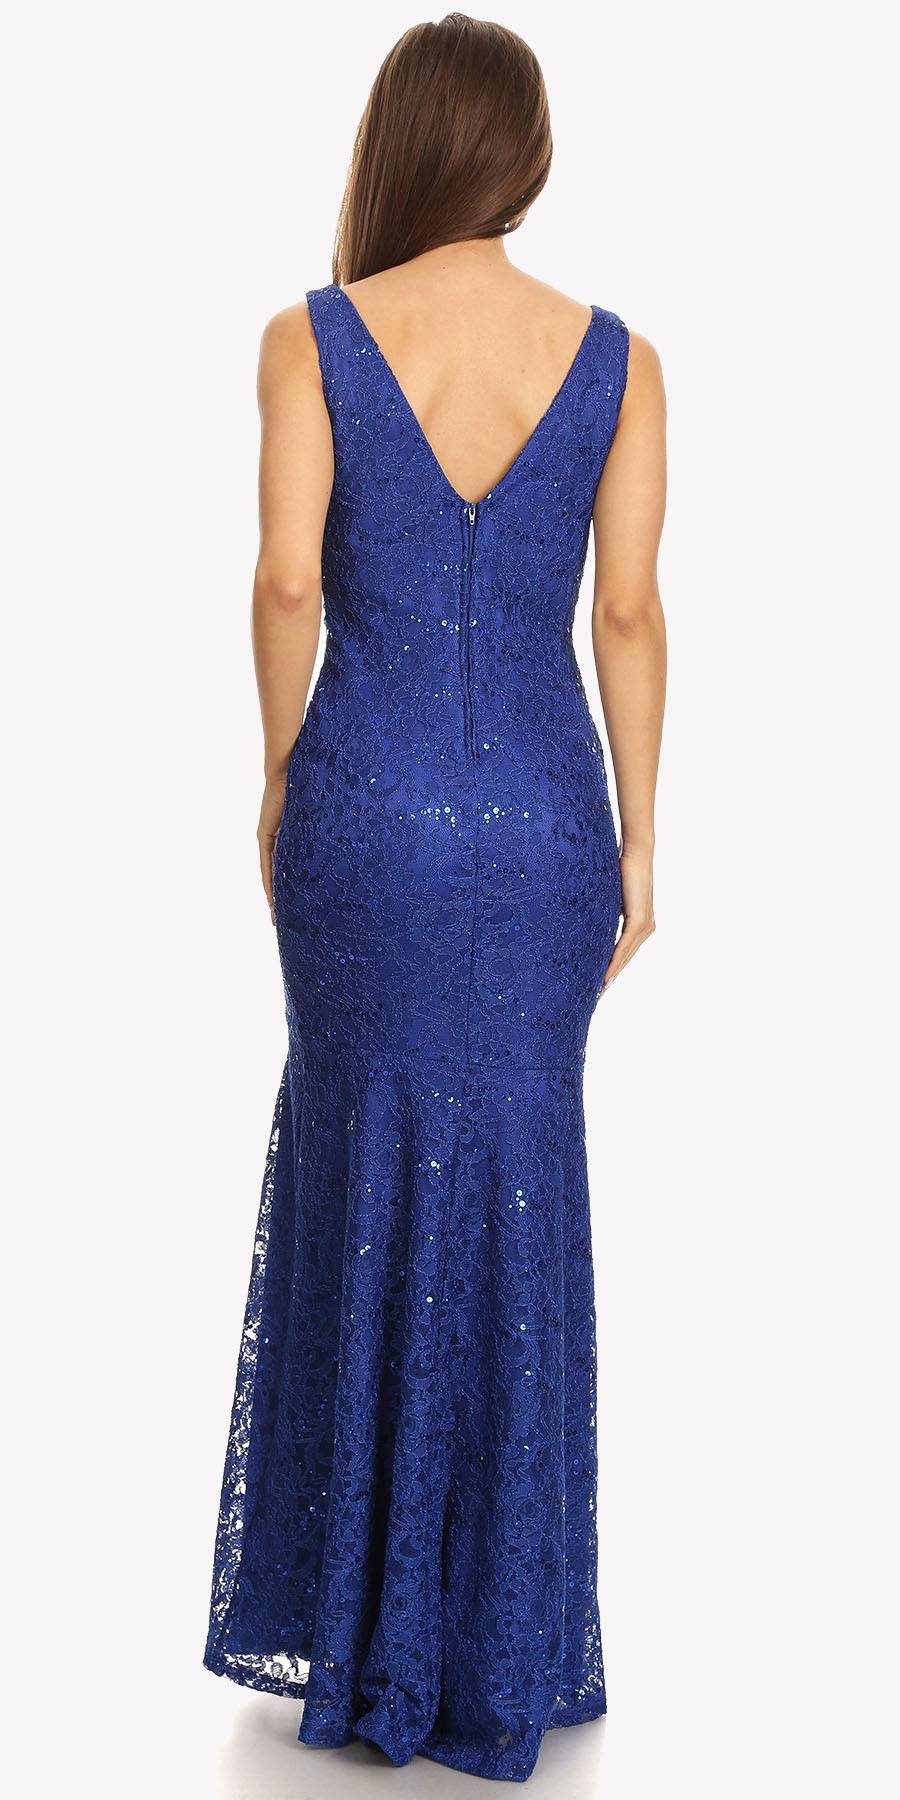 Lace Mermaid Evening Gown V-Neck with Mesh Panel Royal Blue